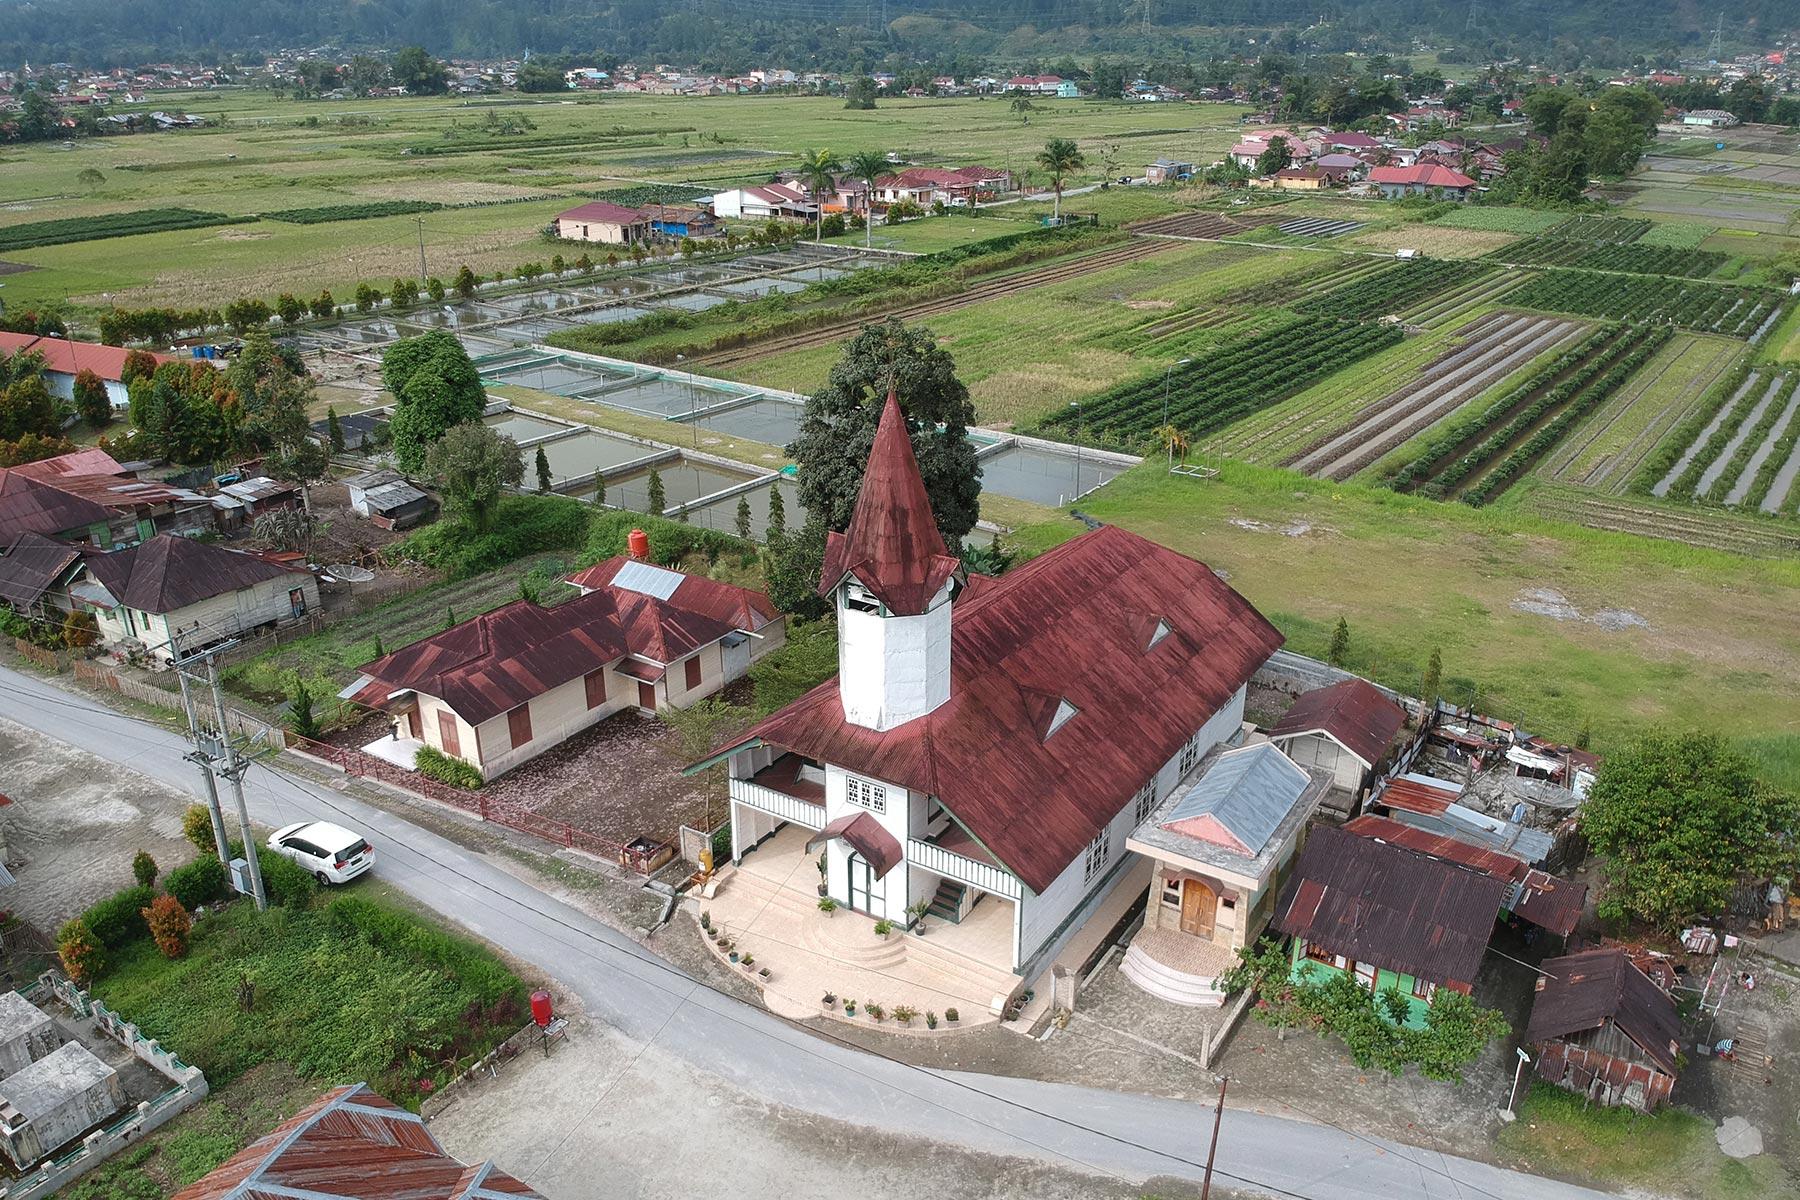 The LWF National Committee in Indonesia installed an internet satellite tower on the properties of four Lutheran churches in remote areas to assist online learning. Church pictured is HKBP. Photo: by Andi Gultom/KNLWF.